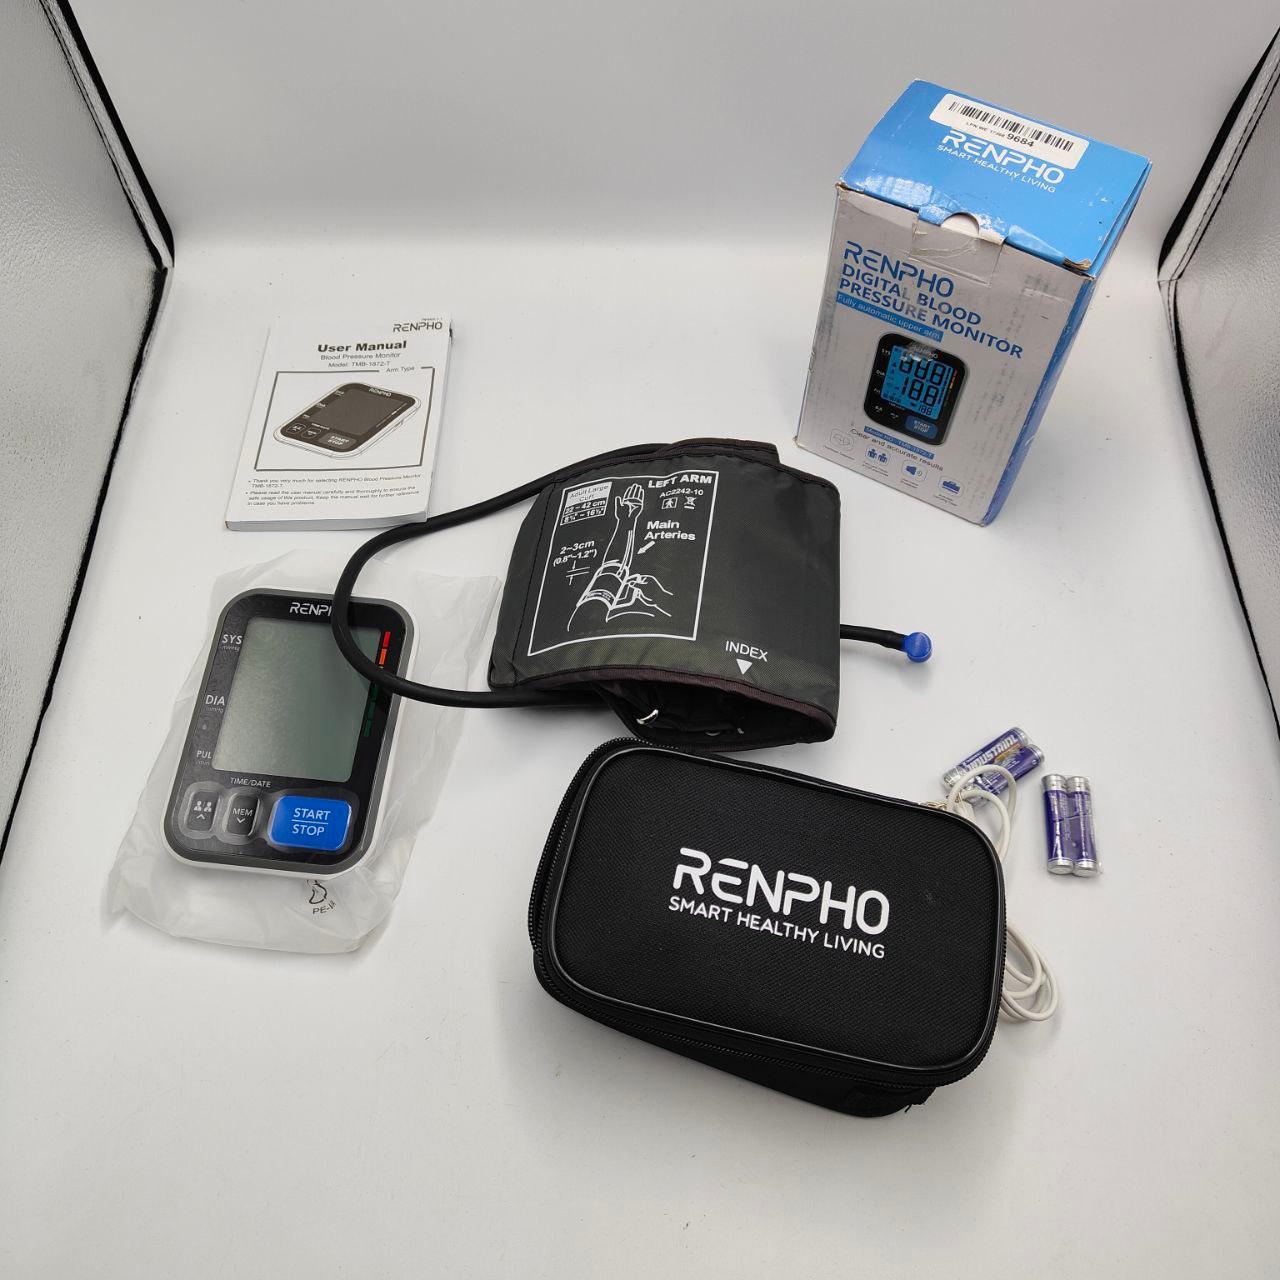 RENPHO Blood Pressure Monitors with Voice Broadcast for Home Use - Massive Discounts